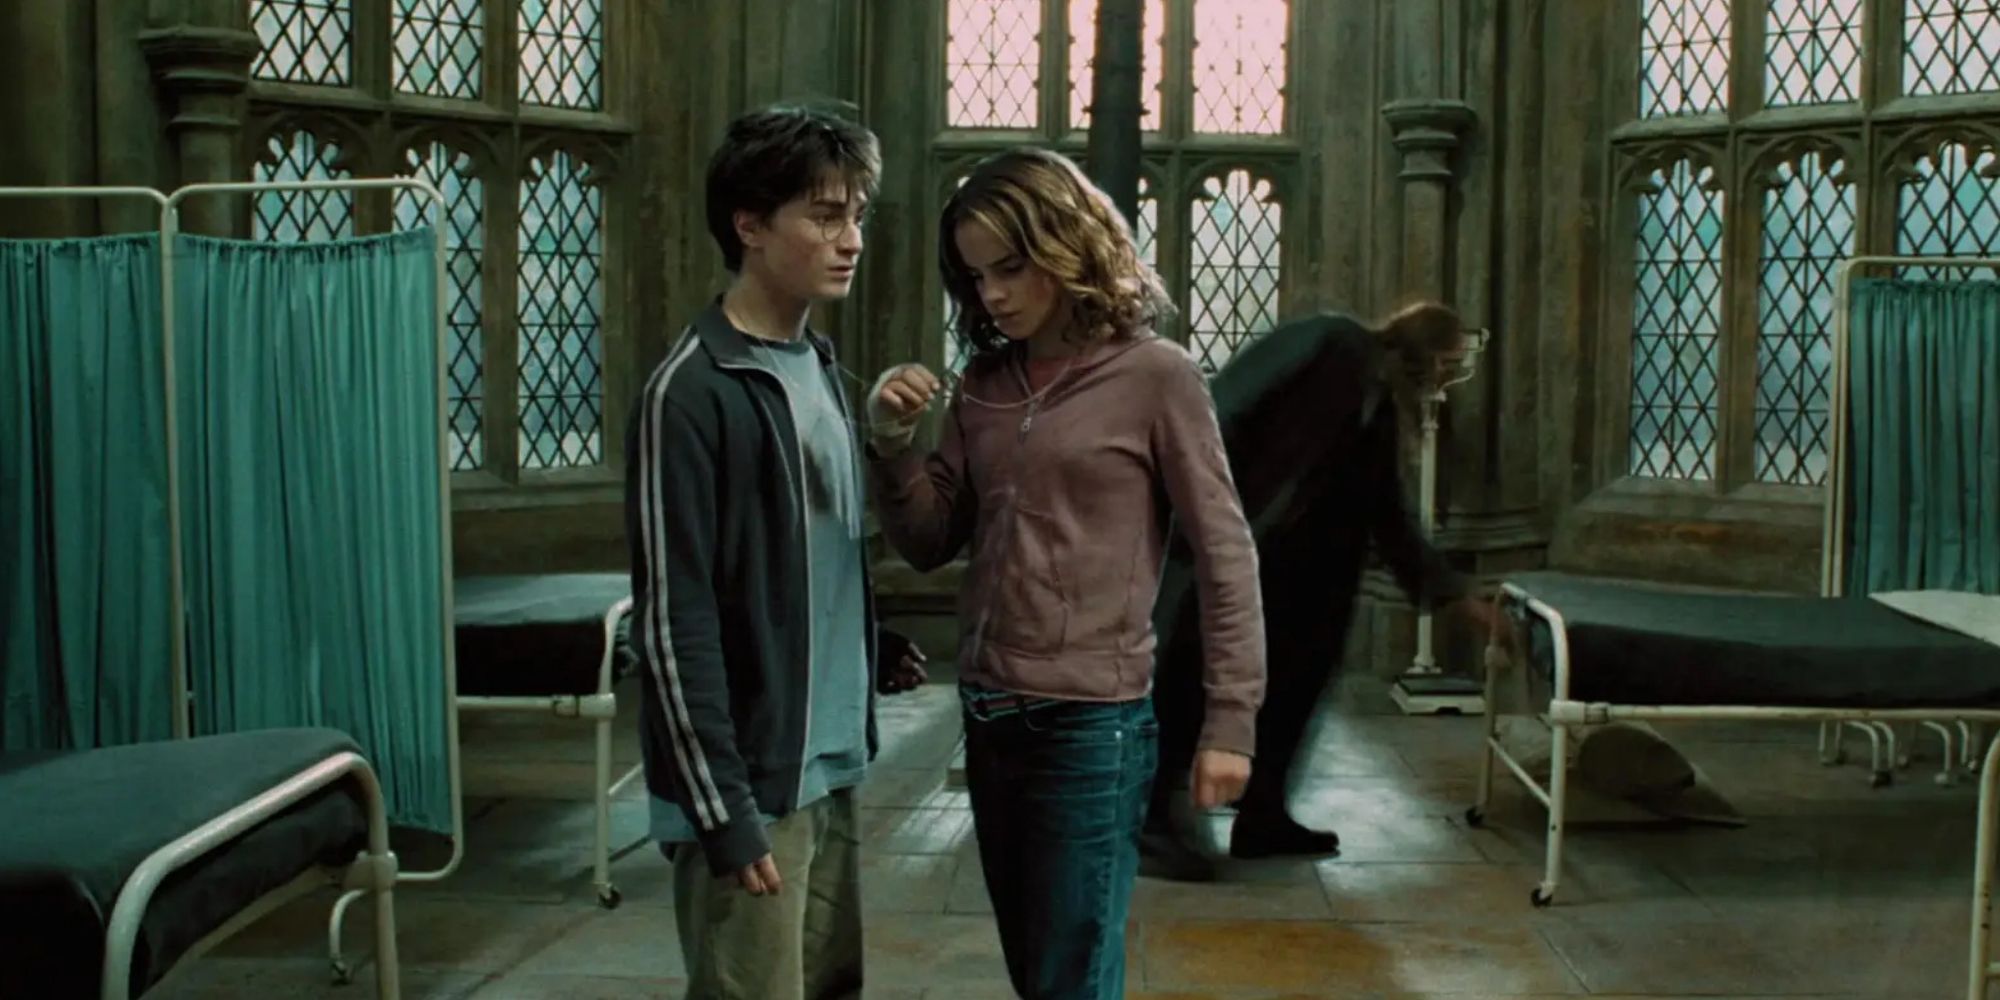 Harry (Daniel Radcliffe) and Hermione (Emma Watson) use the time turner in Harry Potter and the Prisoner of Azkaban